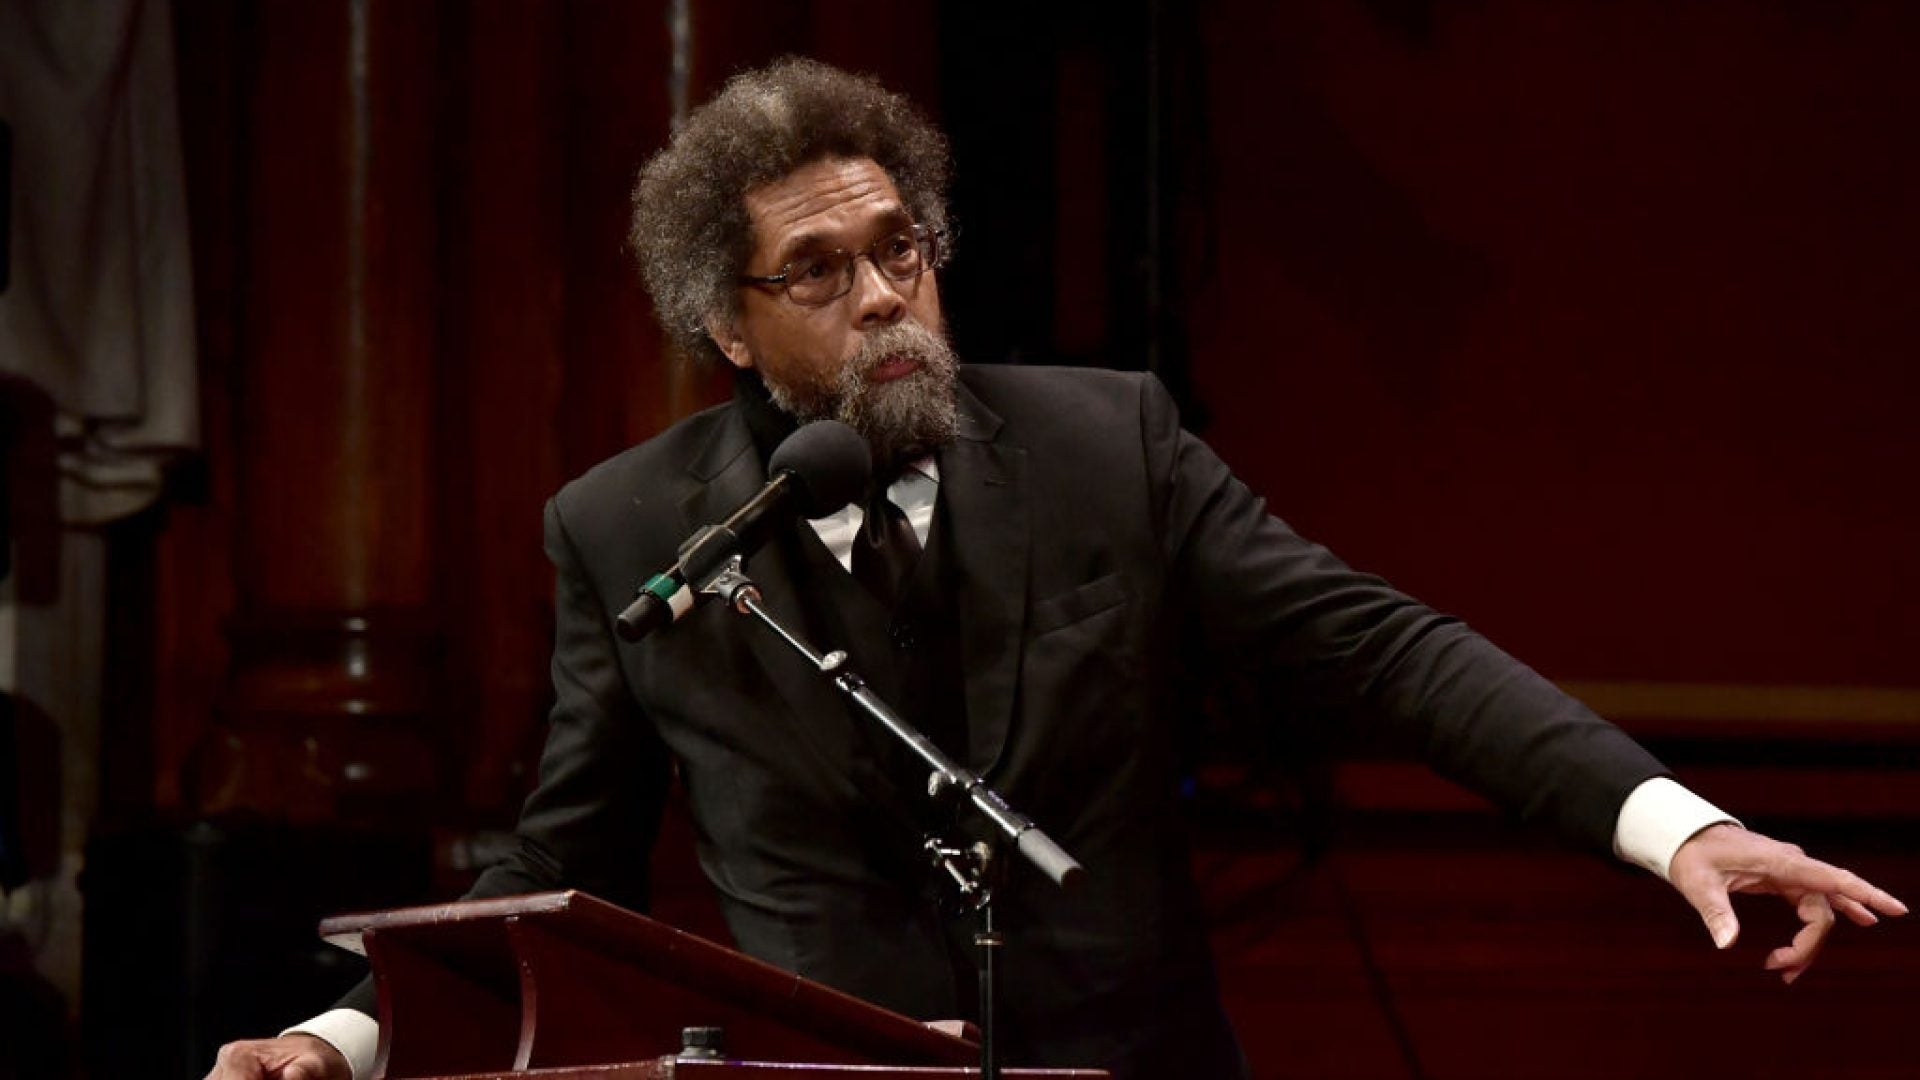 "Neither Political Party Wants To Tell The Truth"– Cornel West Announces Presidential Run